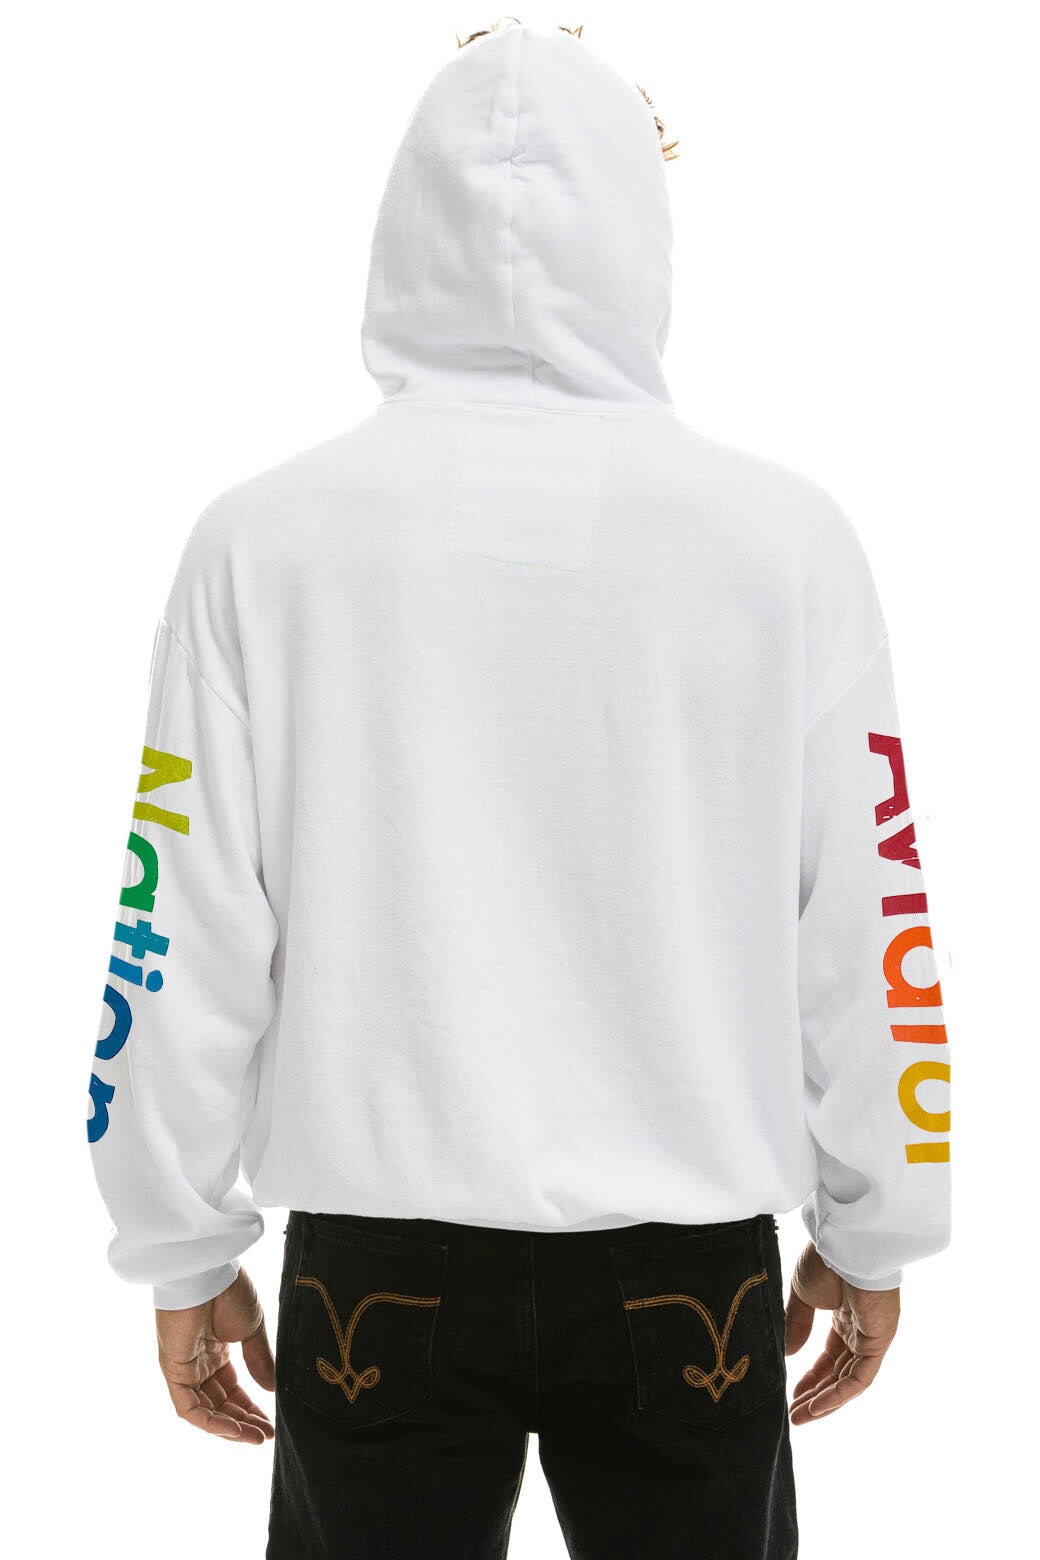 AVIATOR NATION VAIL RELAXED PULLOVER HOODIE - WHITE Hoodie Aviator Nation 